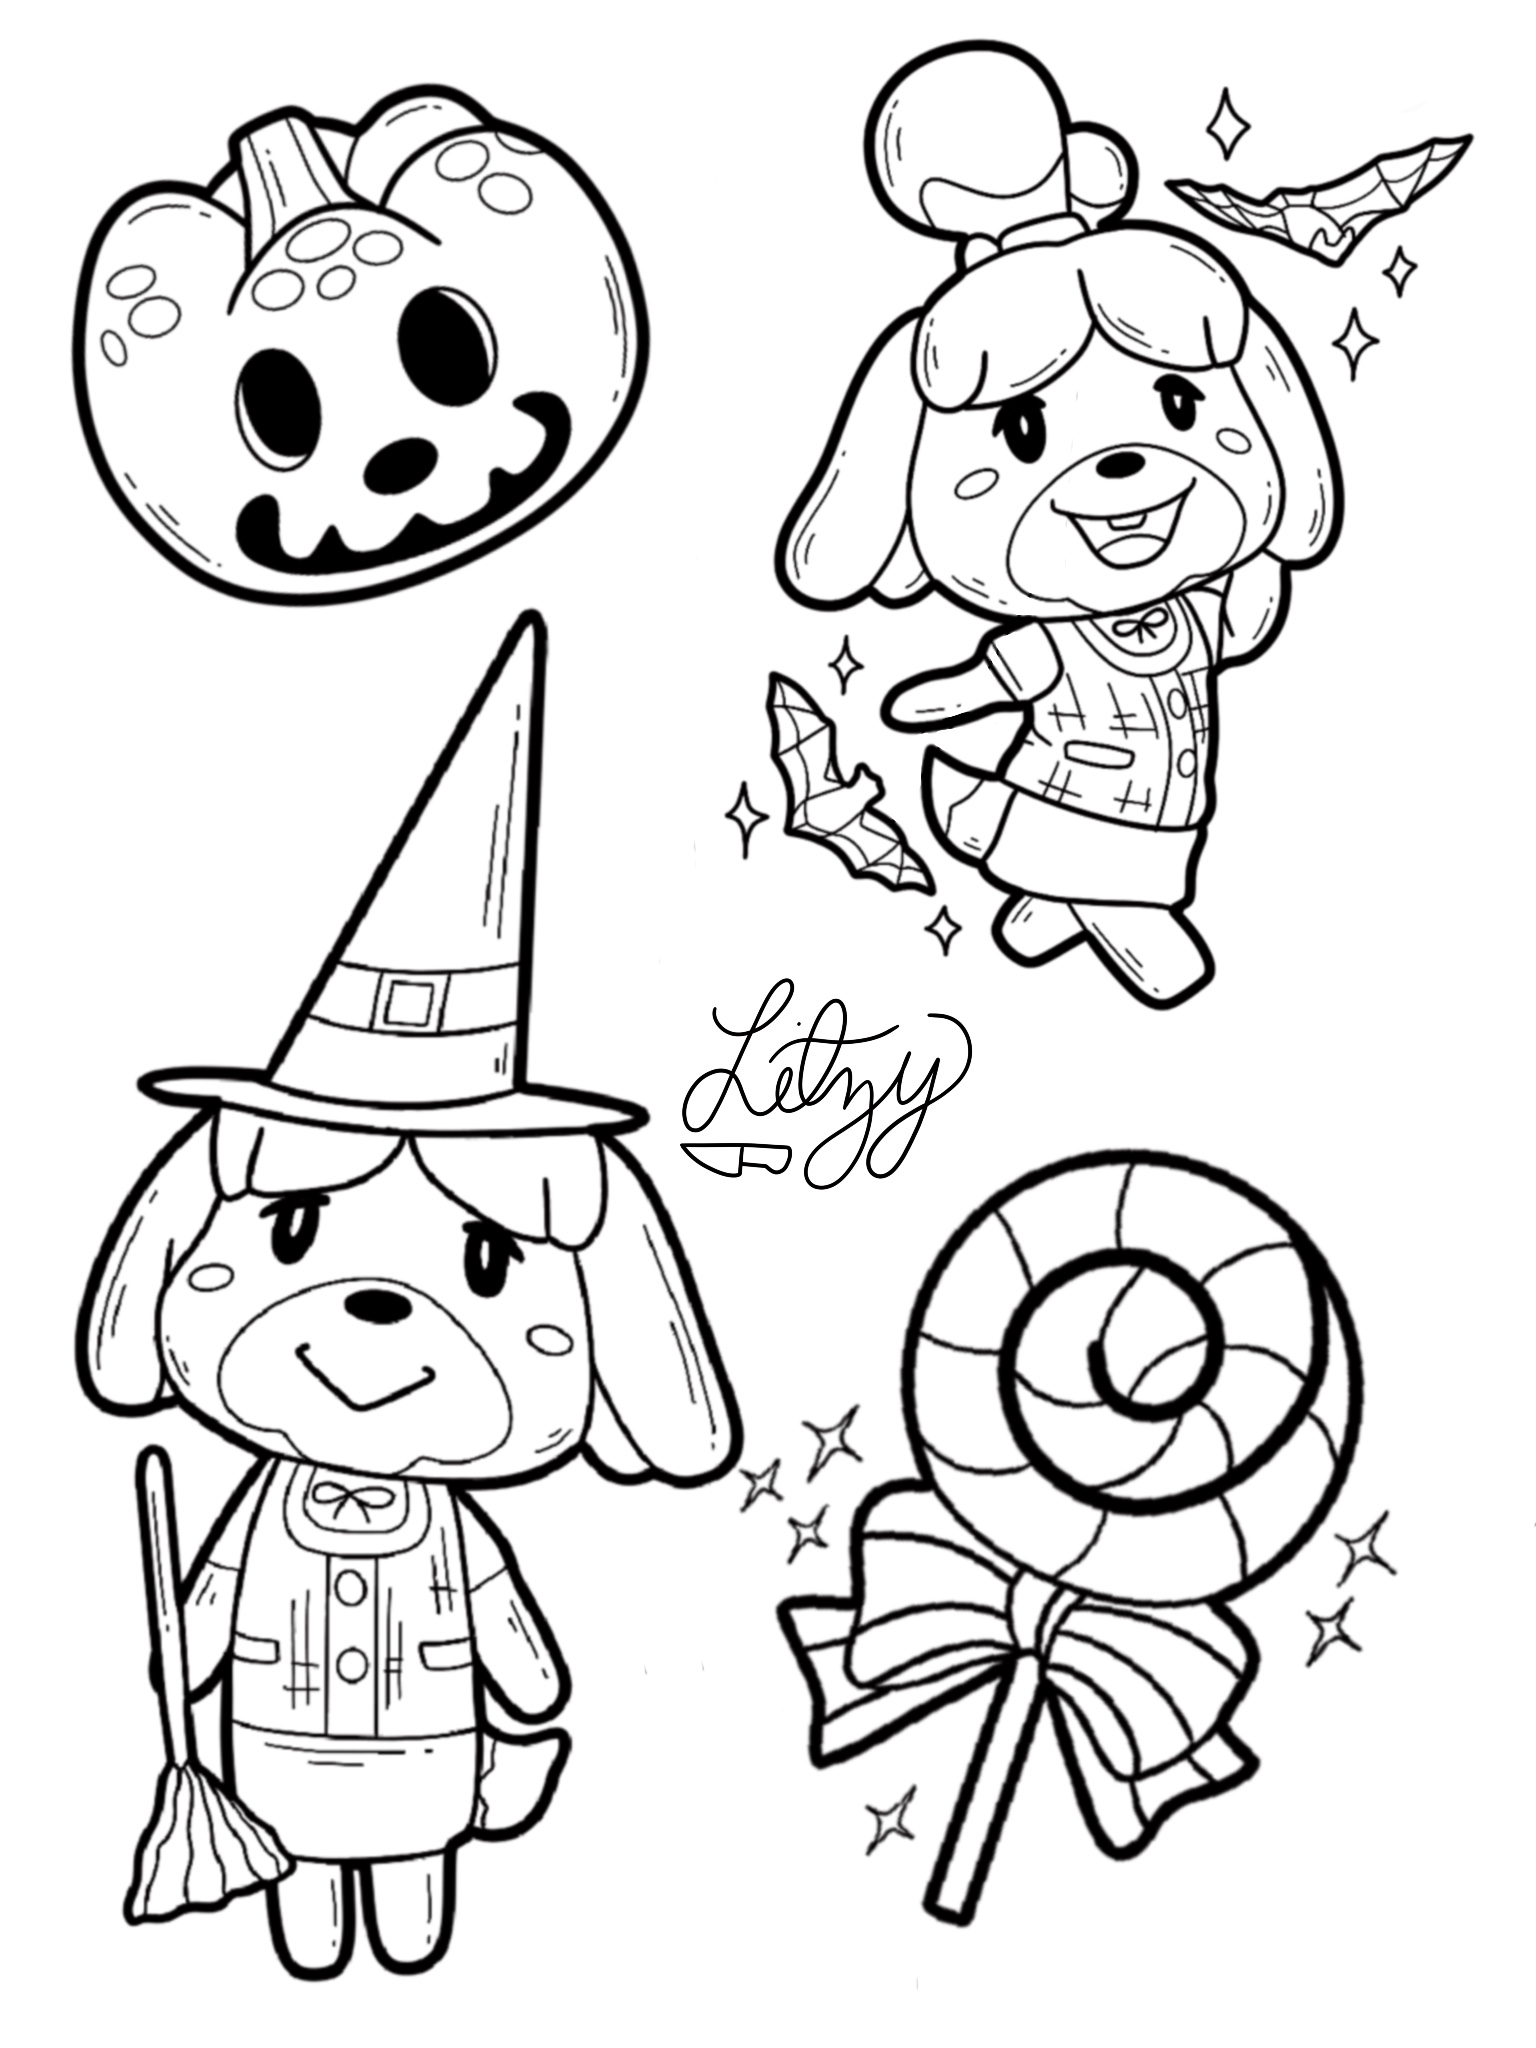 Coloring book art, Animal crossing characters, Coloring pages